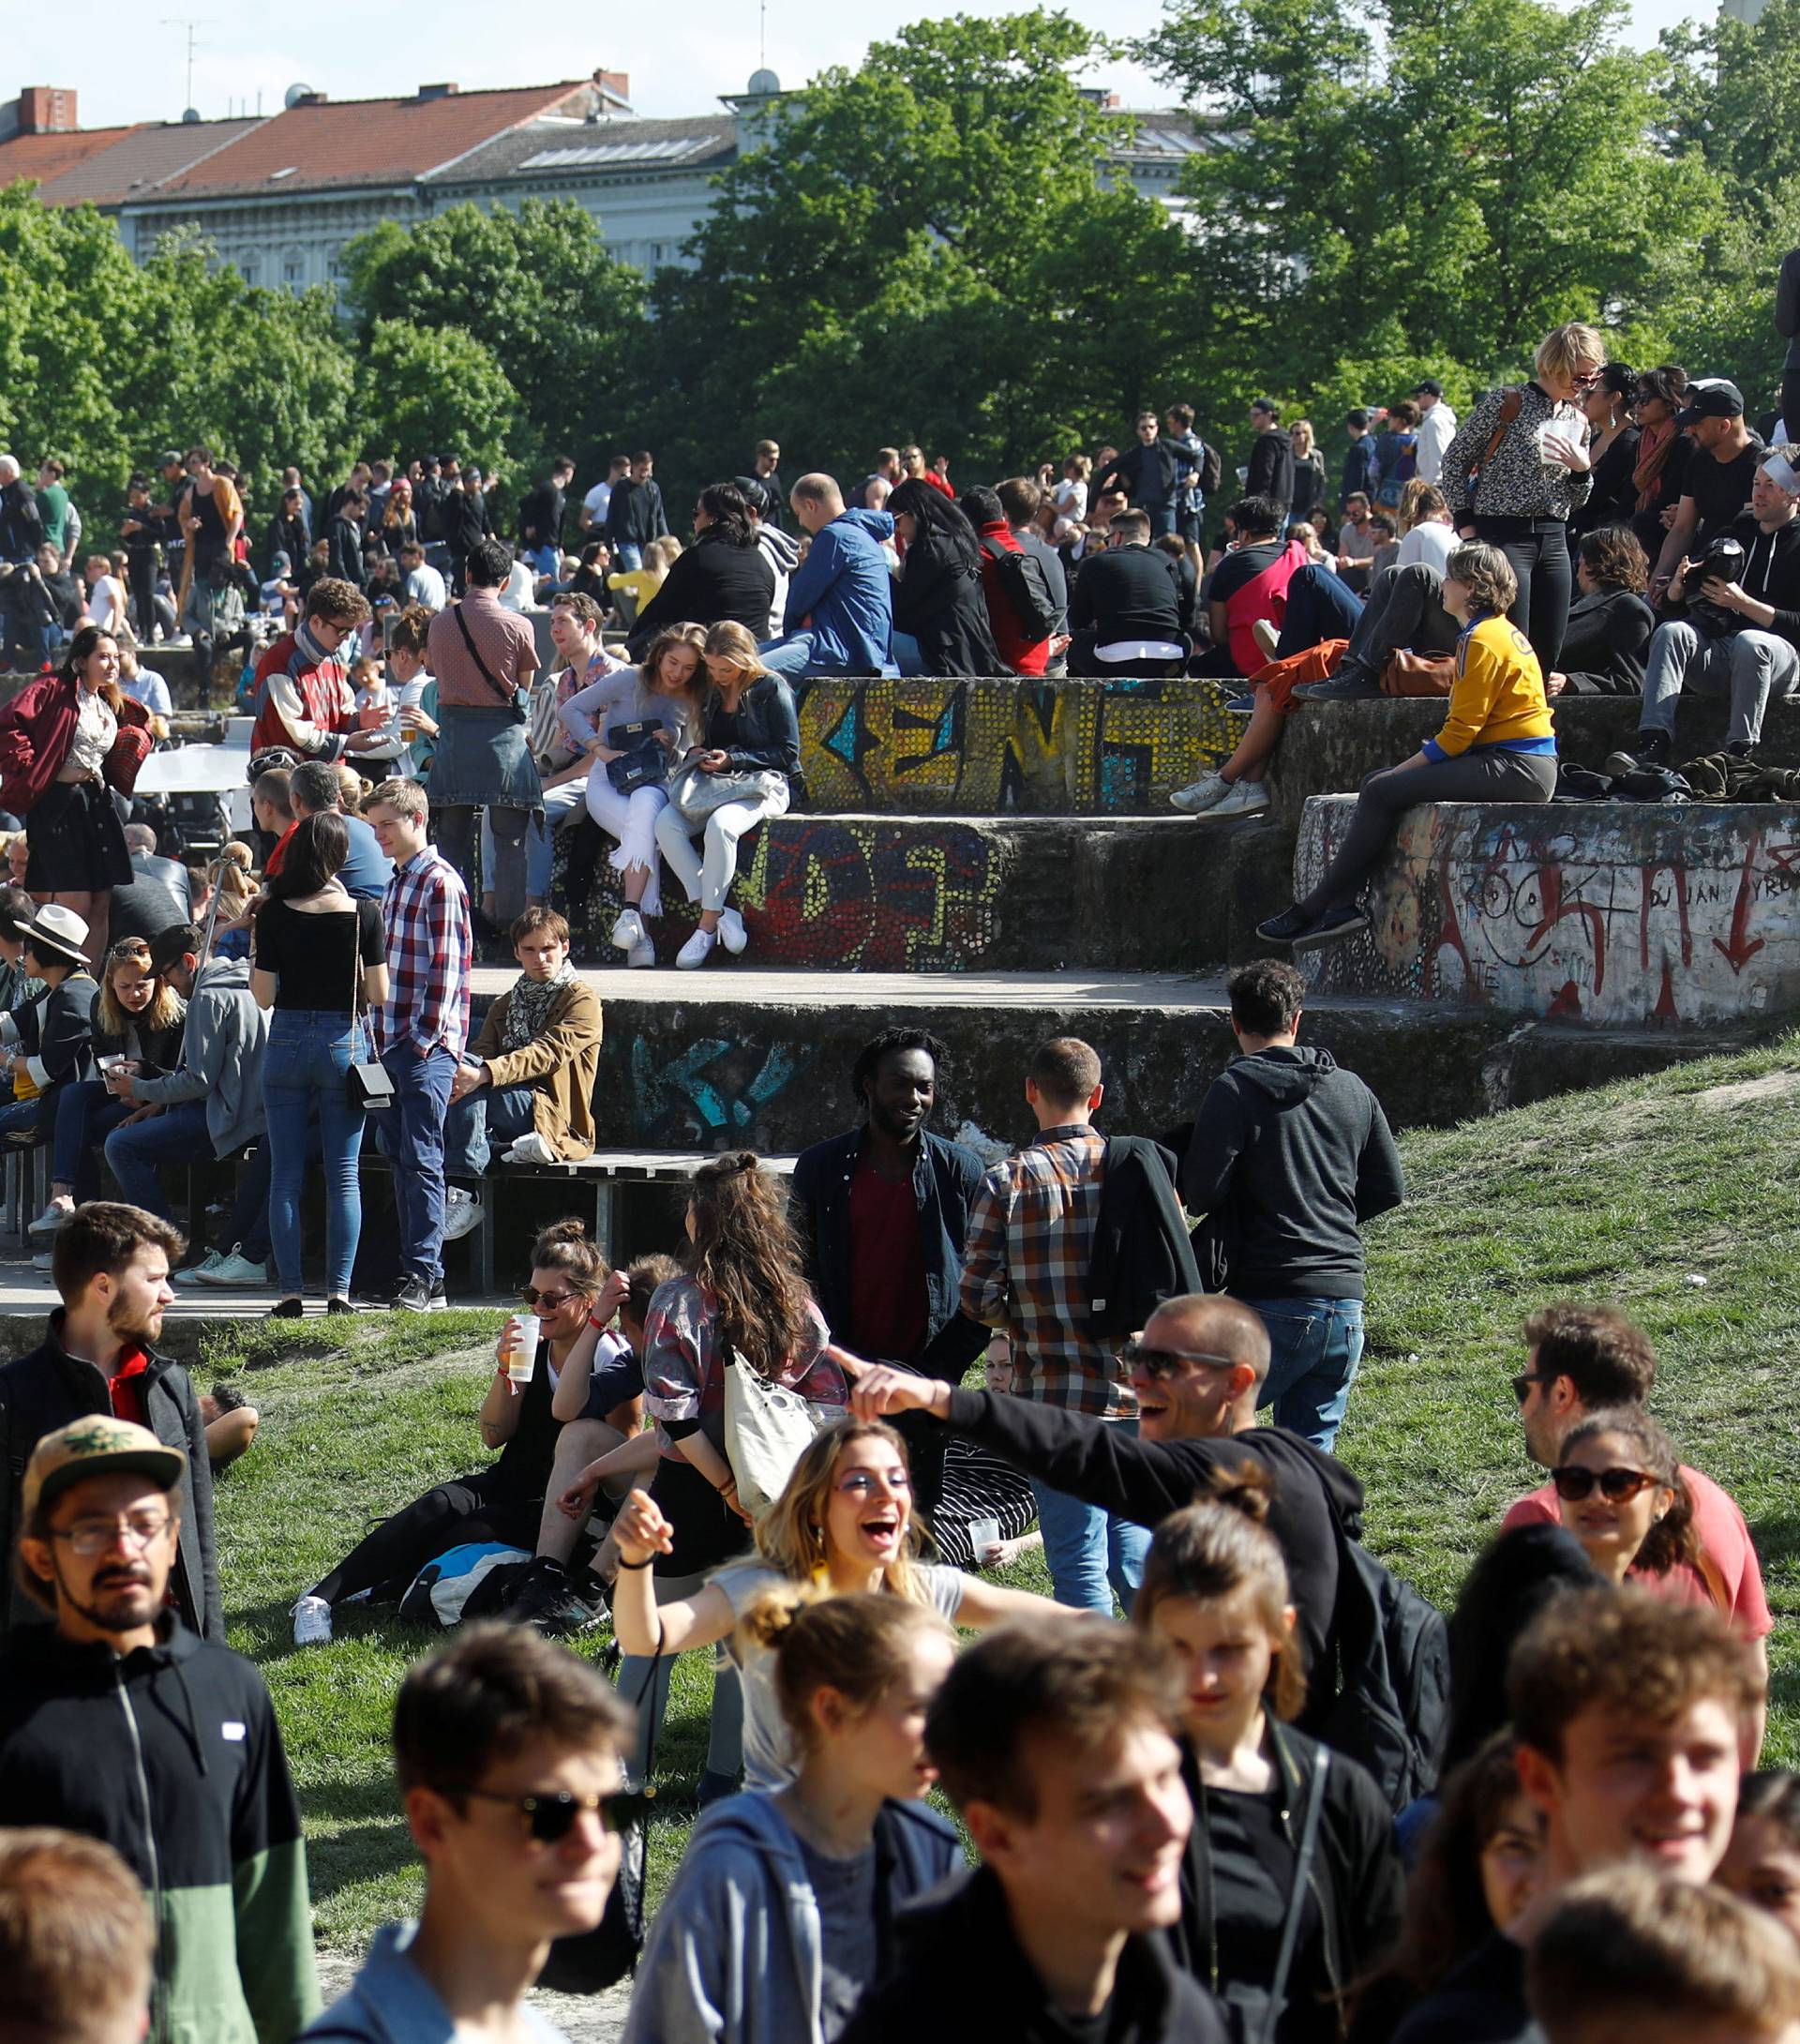 May Day celebrations in Berlin